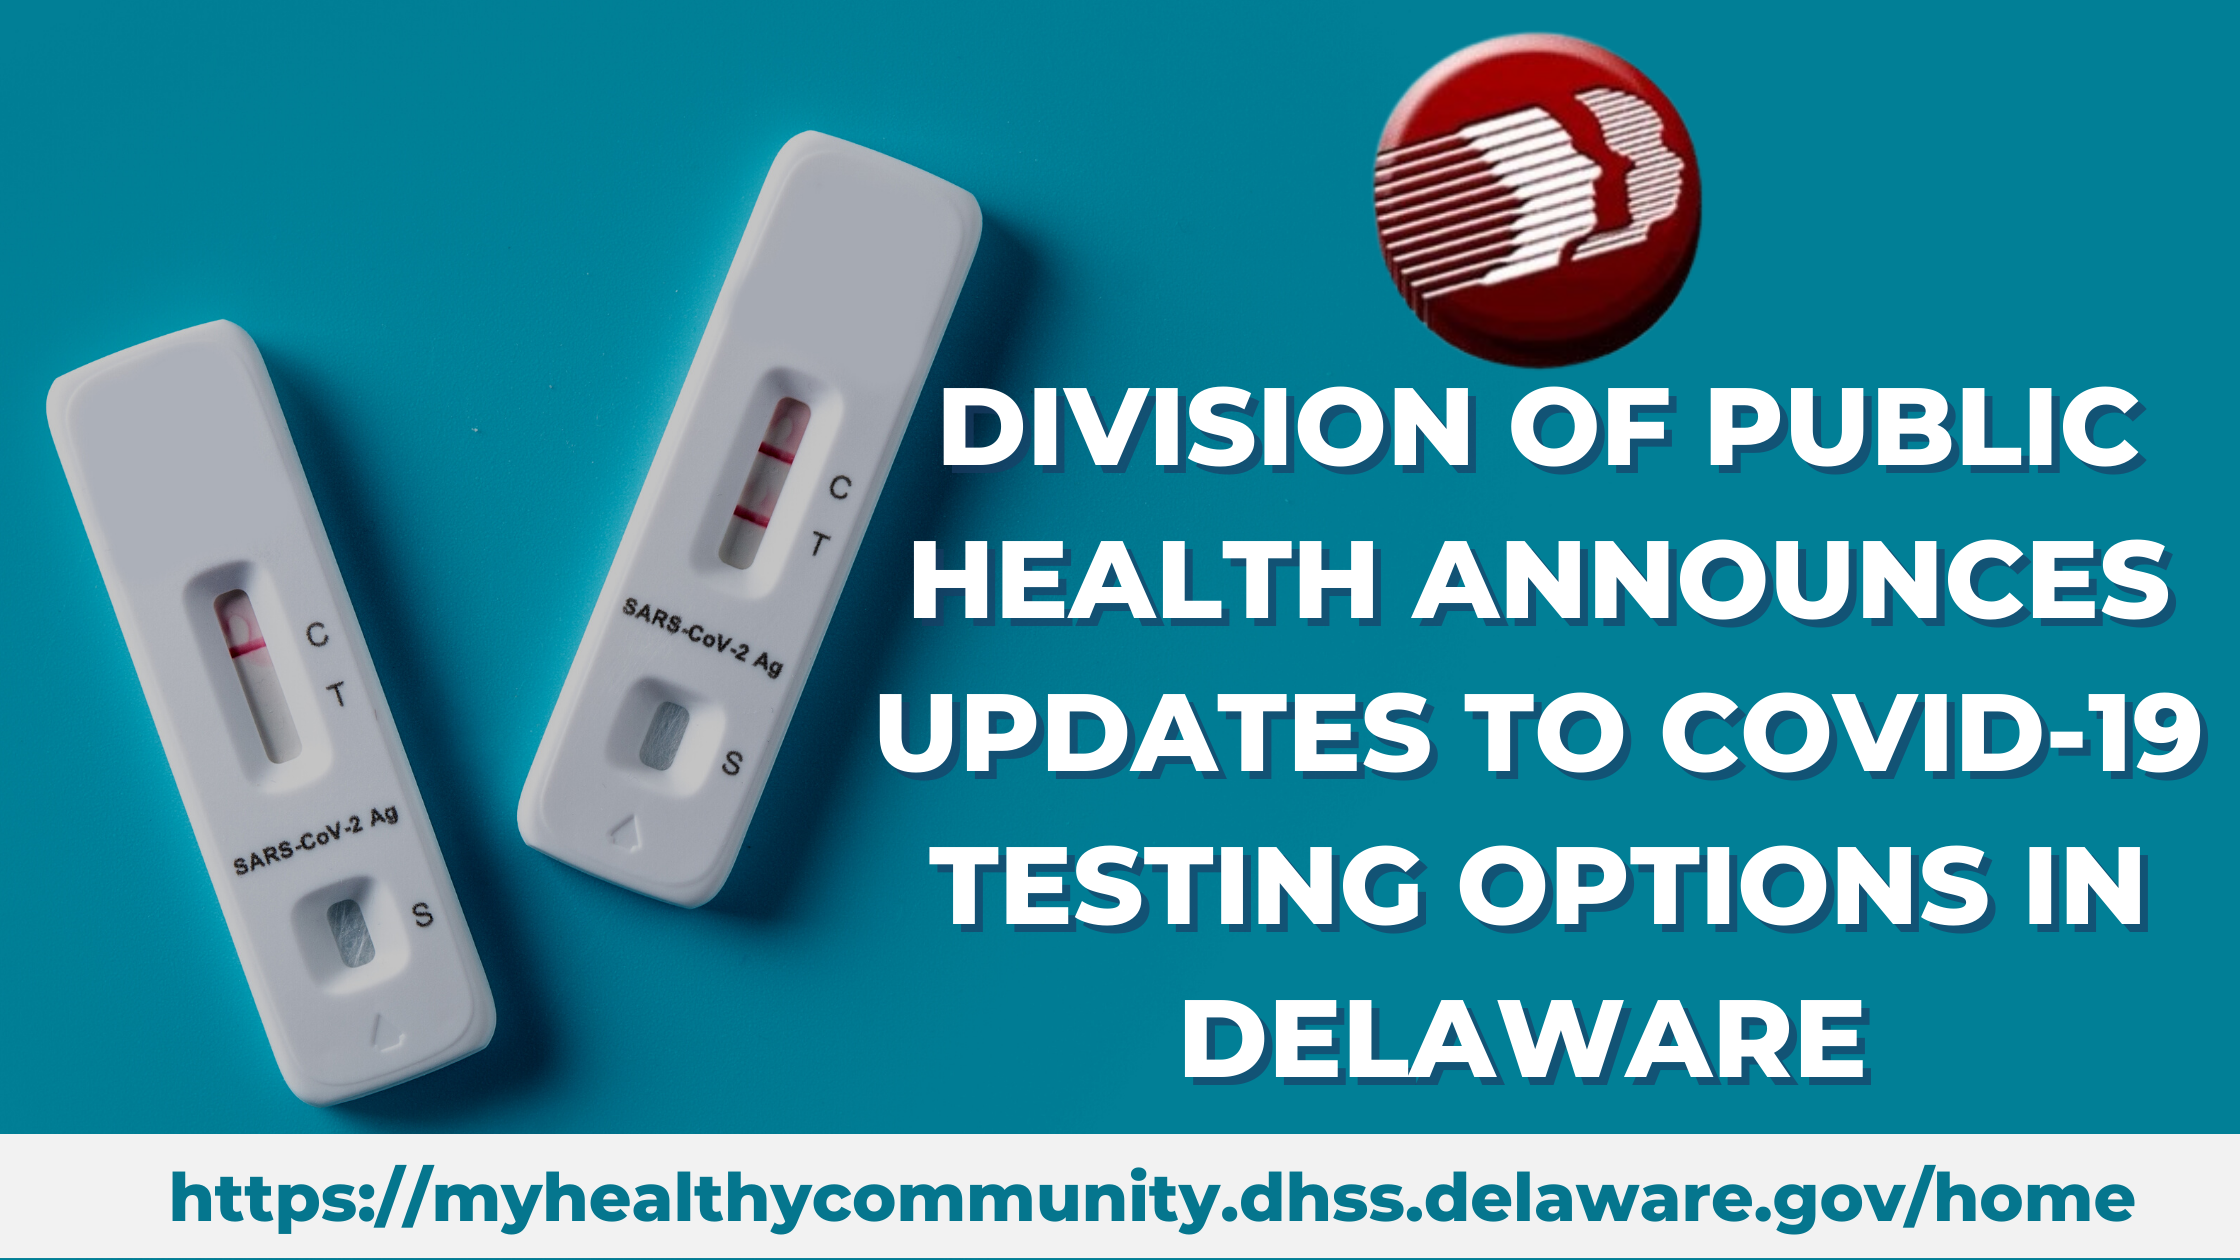 Delaware Division of Public Health Announces Changes to Access for COVID-19 Testing in Delaware